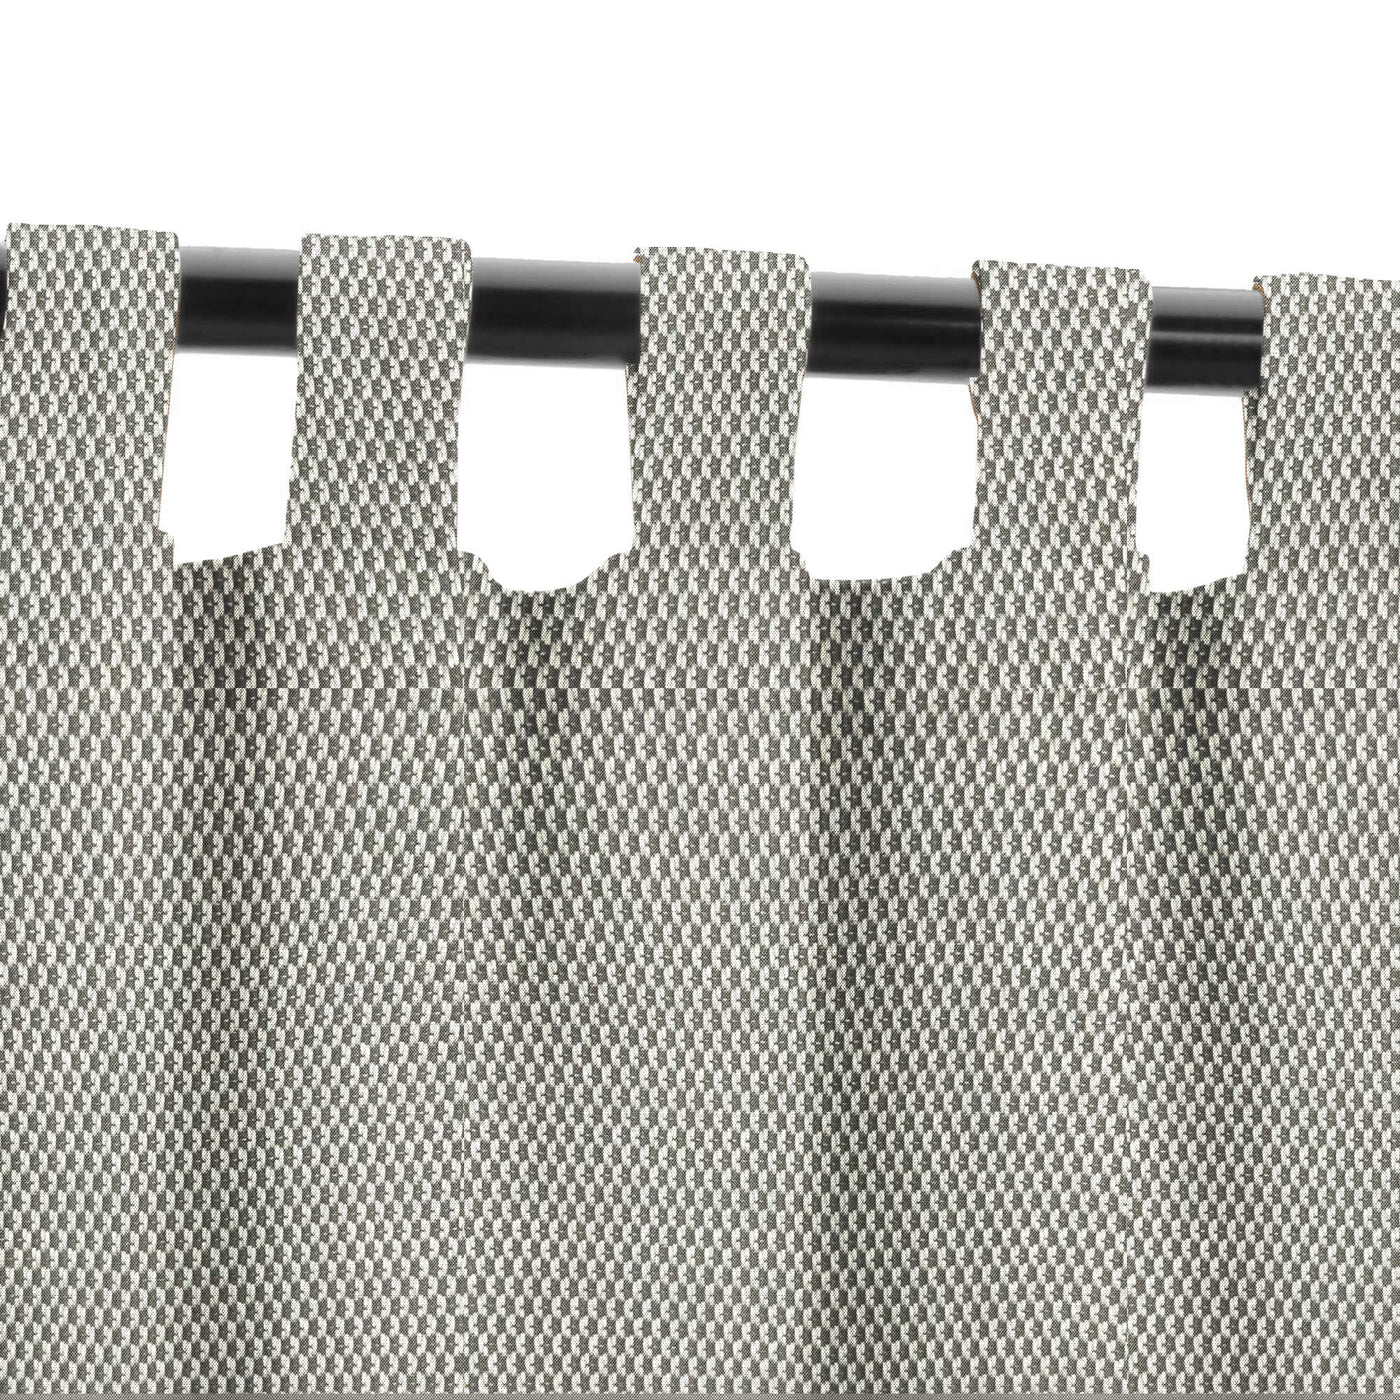 PENGI Outdoor Curtains Waterproof - Union Gray and White